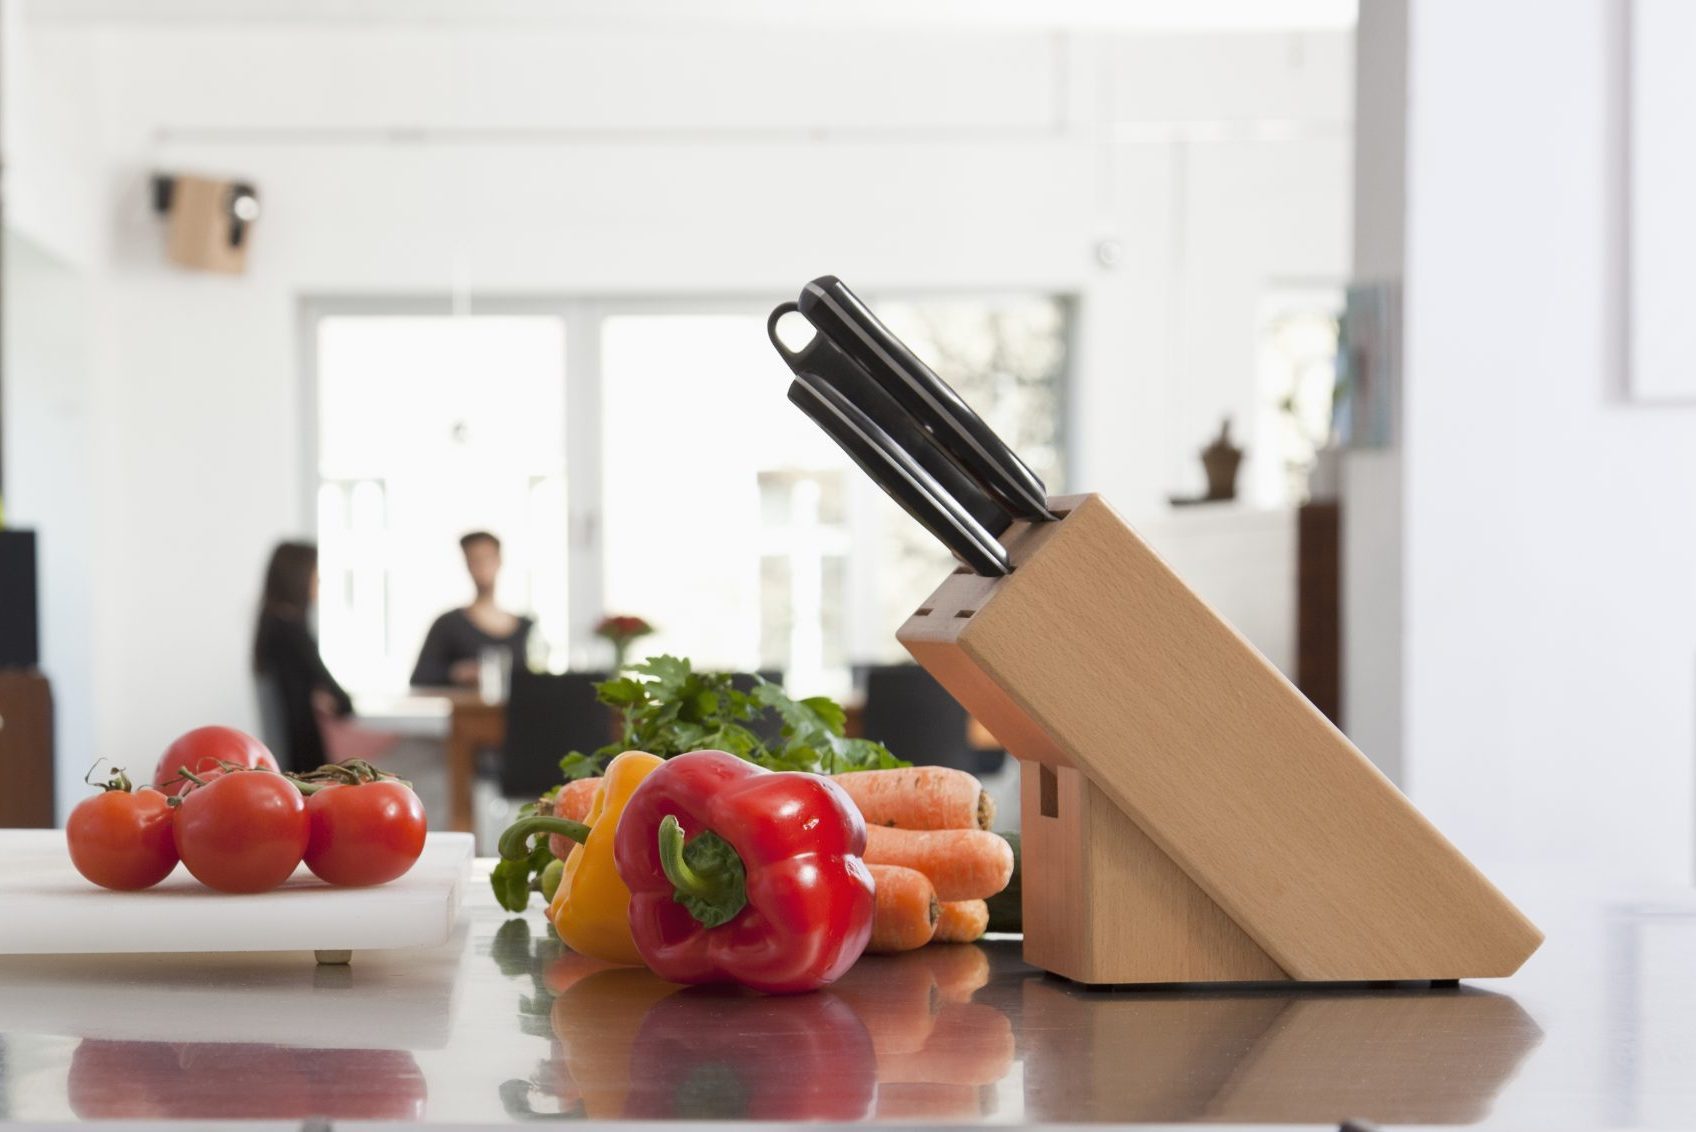 Tomatoes, carrots and bell peppers on a kitchen counter with knife block